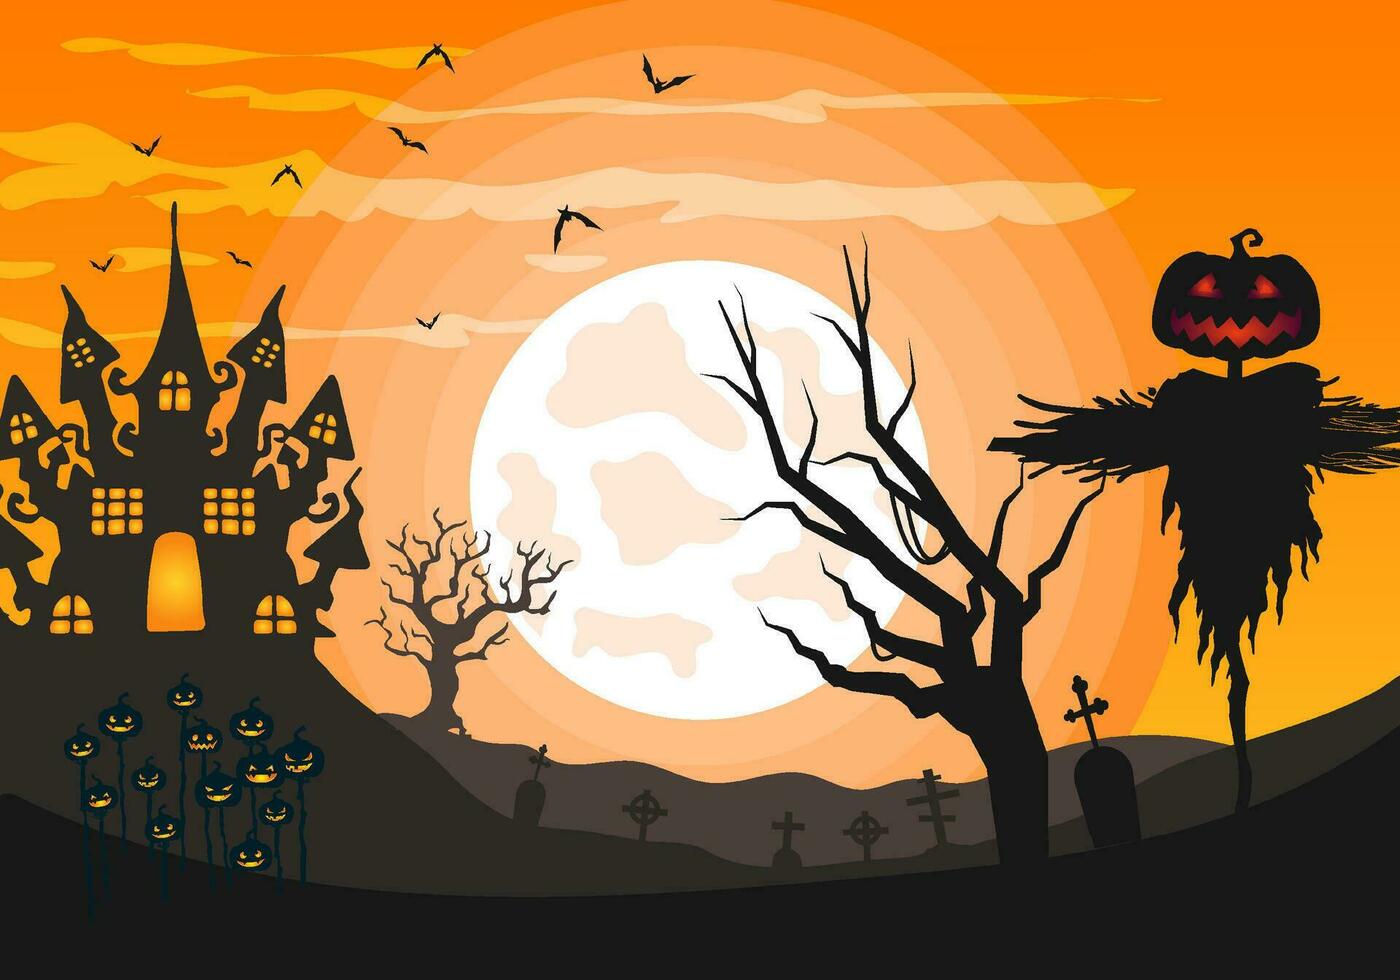 Orange Background illustration of halloween with creepy scarecrow and scary haunted house against a full moon vector